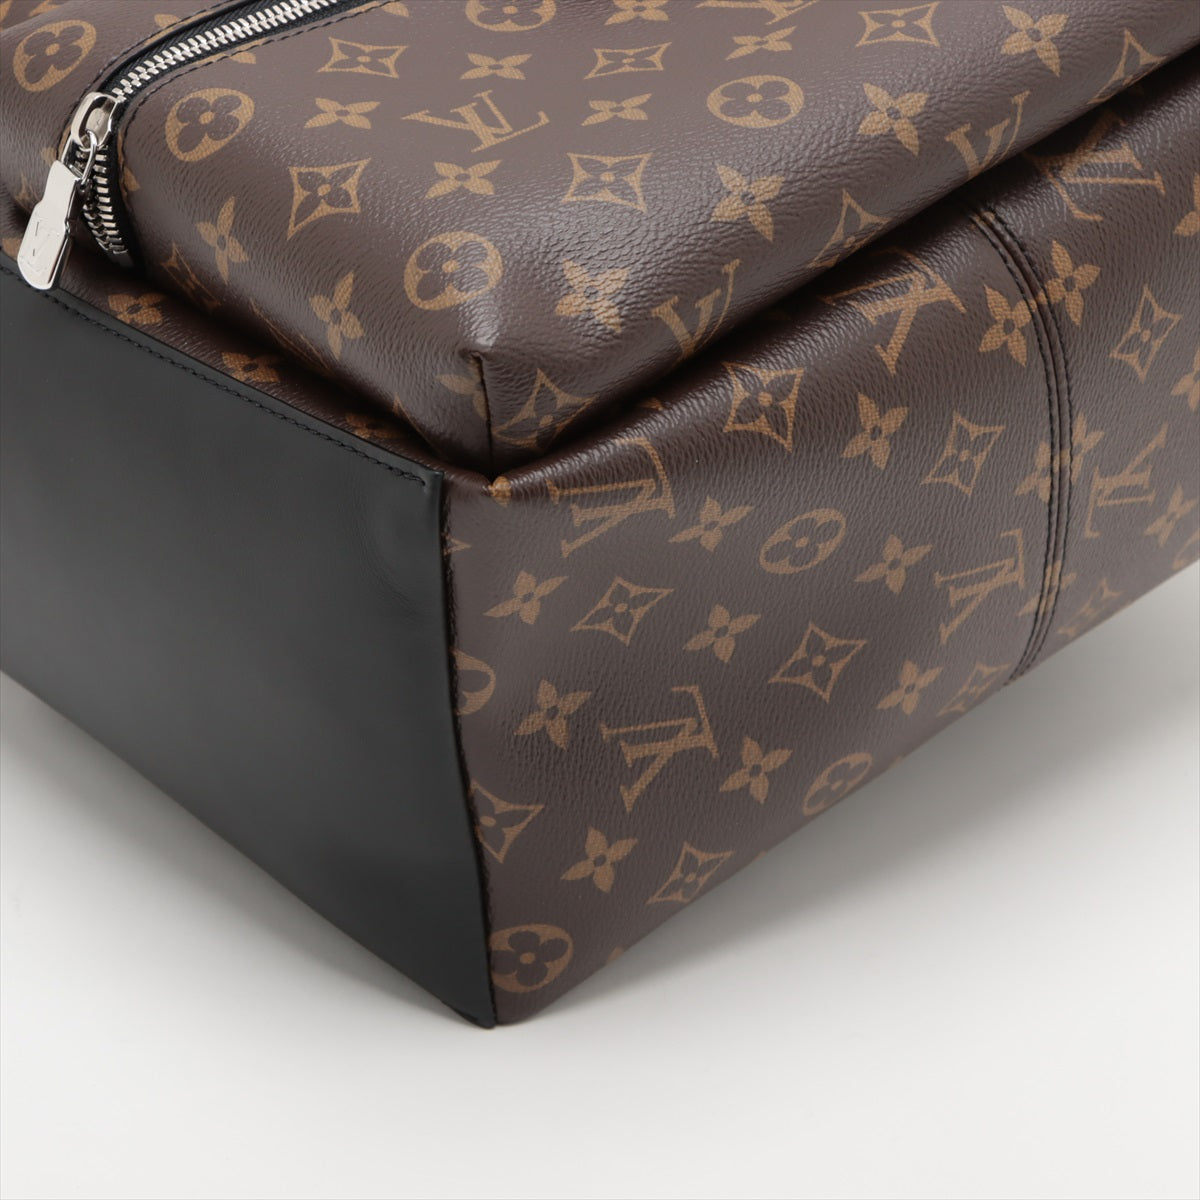 Louis Vuitton Monogram Discovery Backpack M46684 There was an RFID response